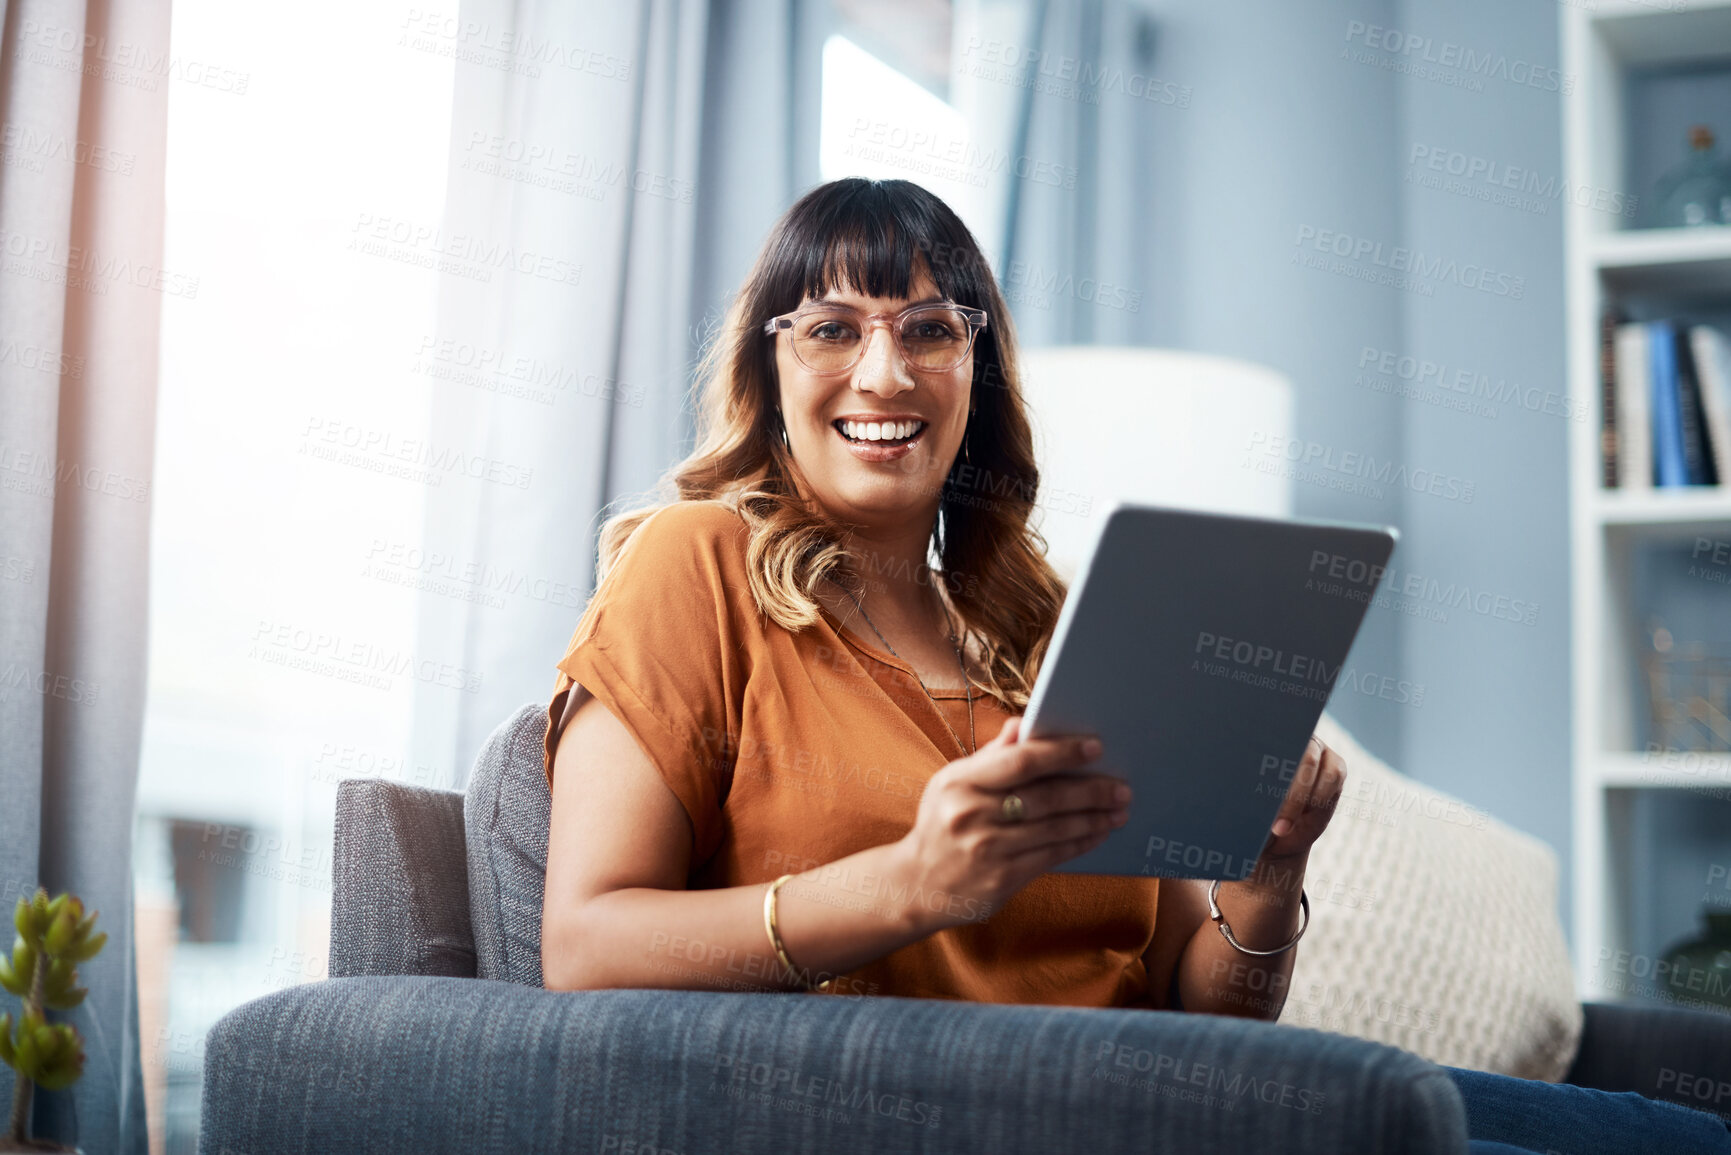 Buy stock photo Shot of a young woman using a digital tablet while relaxing at home